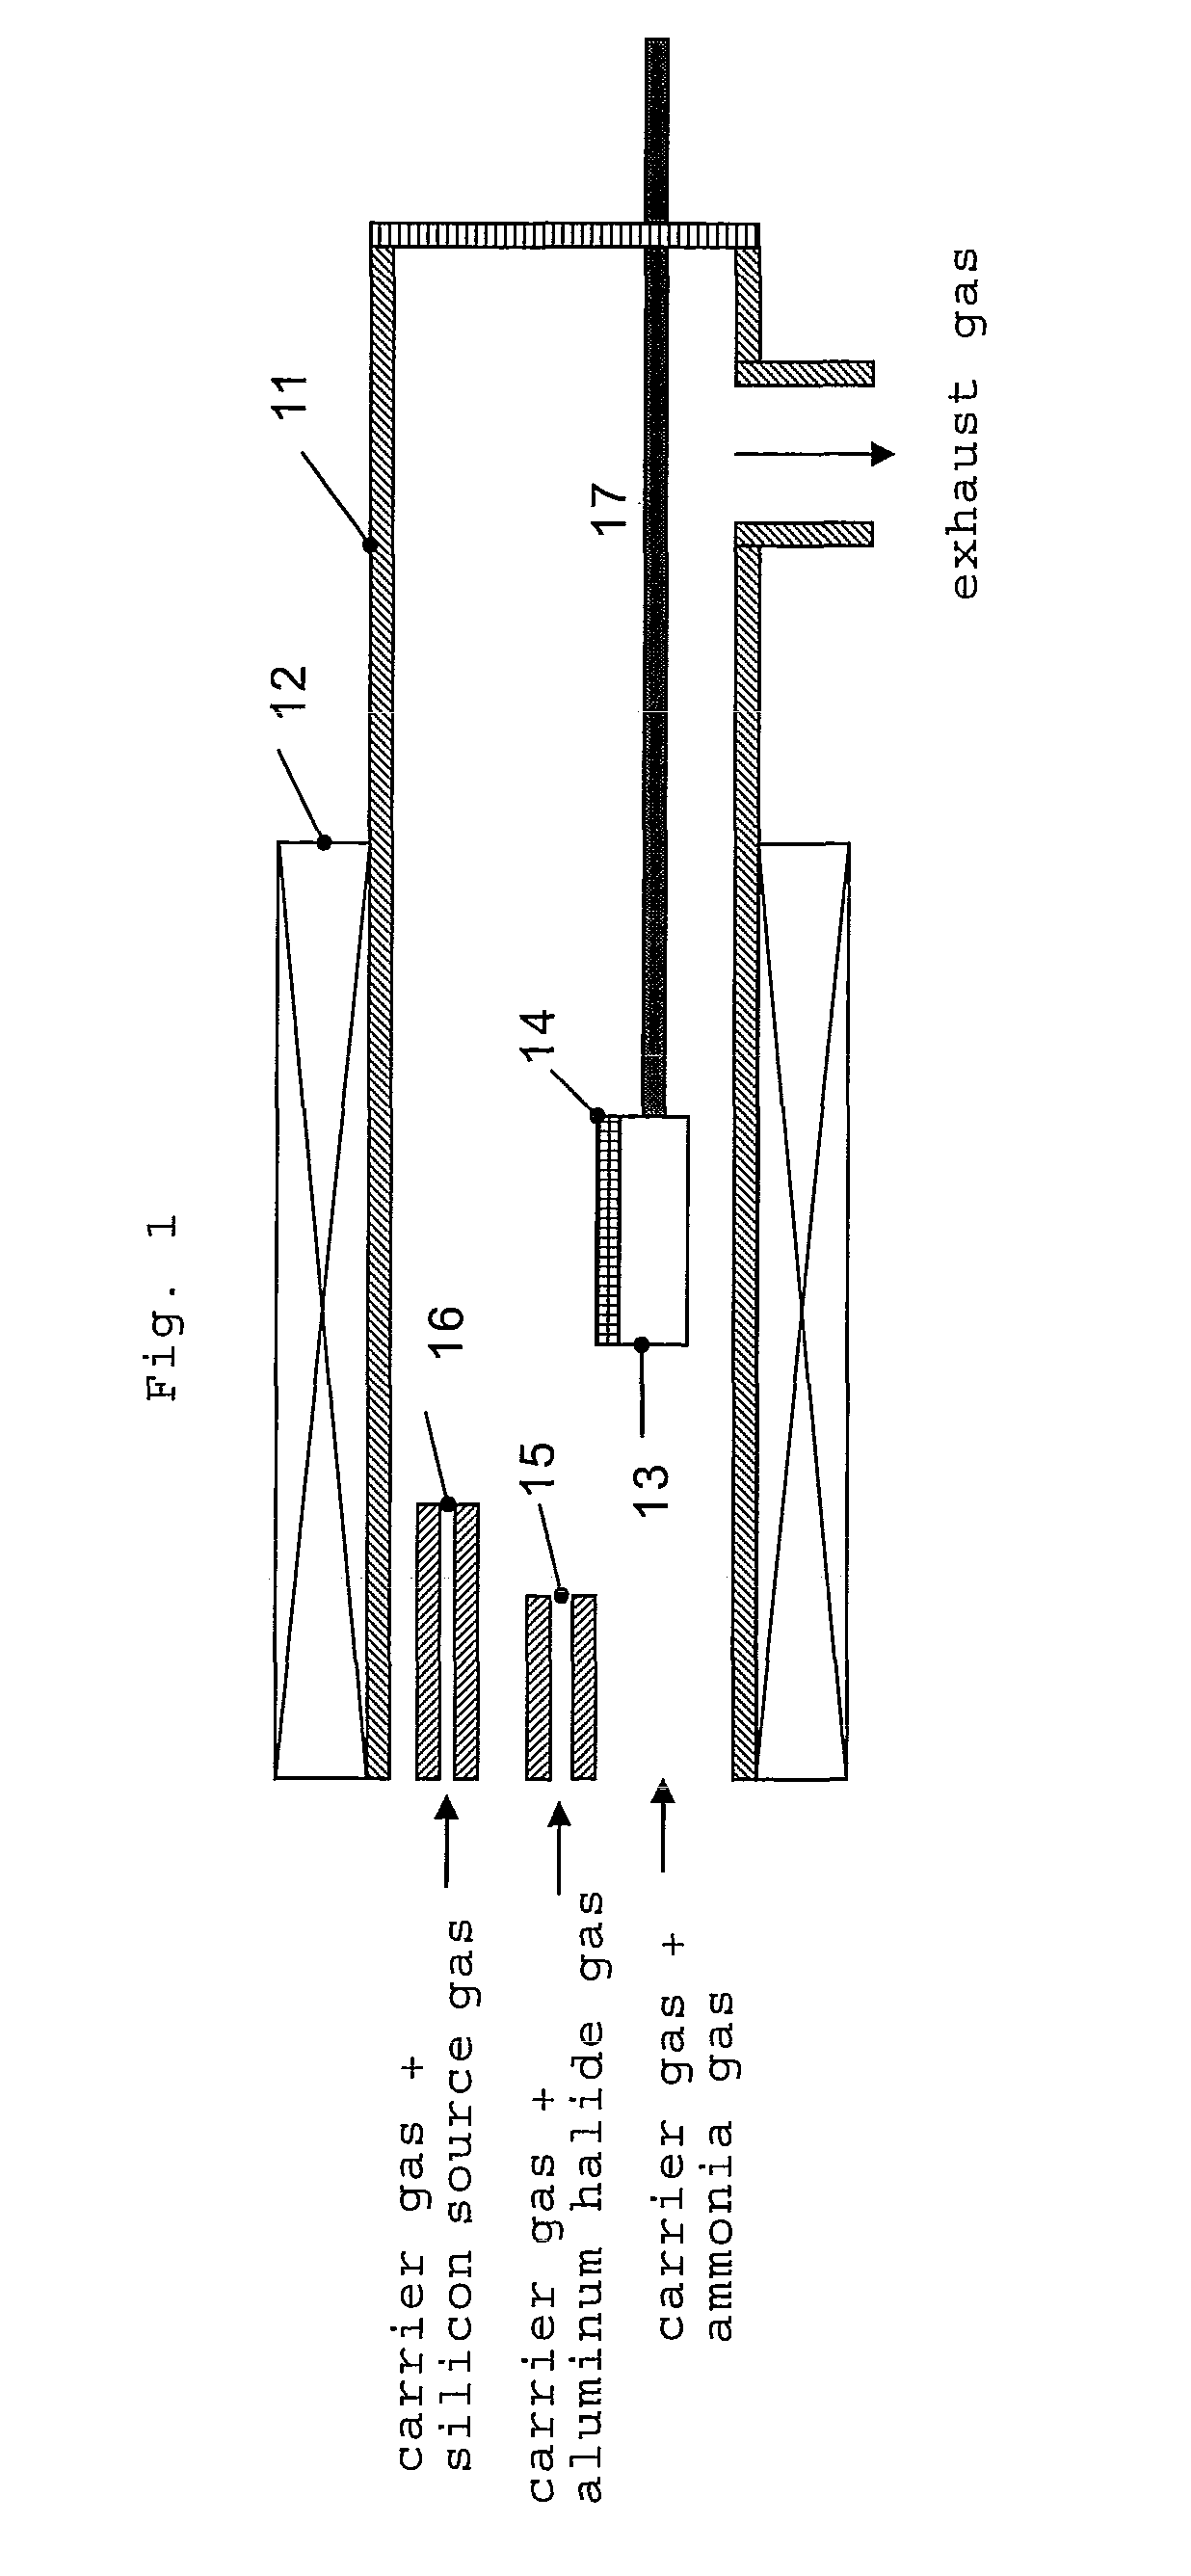 n-Type conductive aluminum nitride semiconductor crystal and manufacturing method thereof